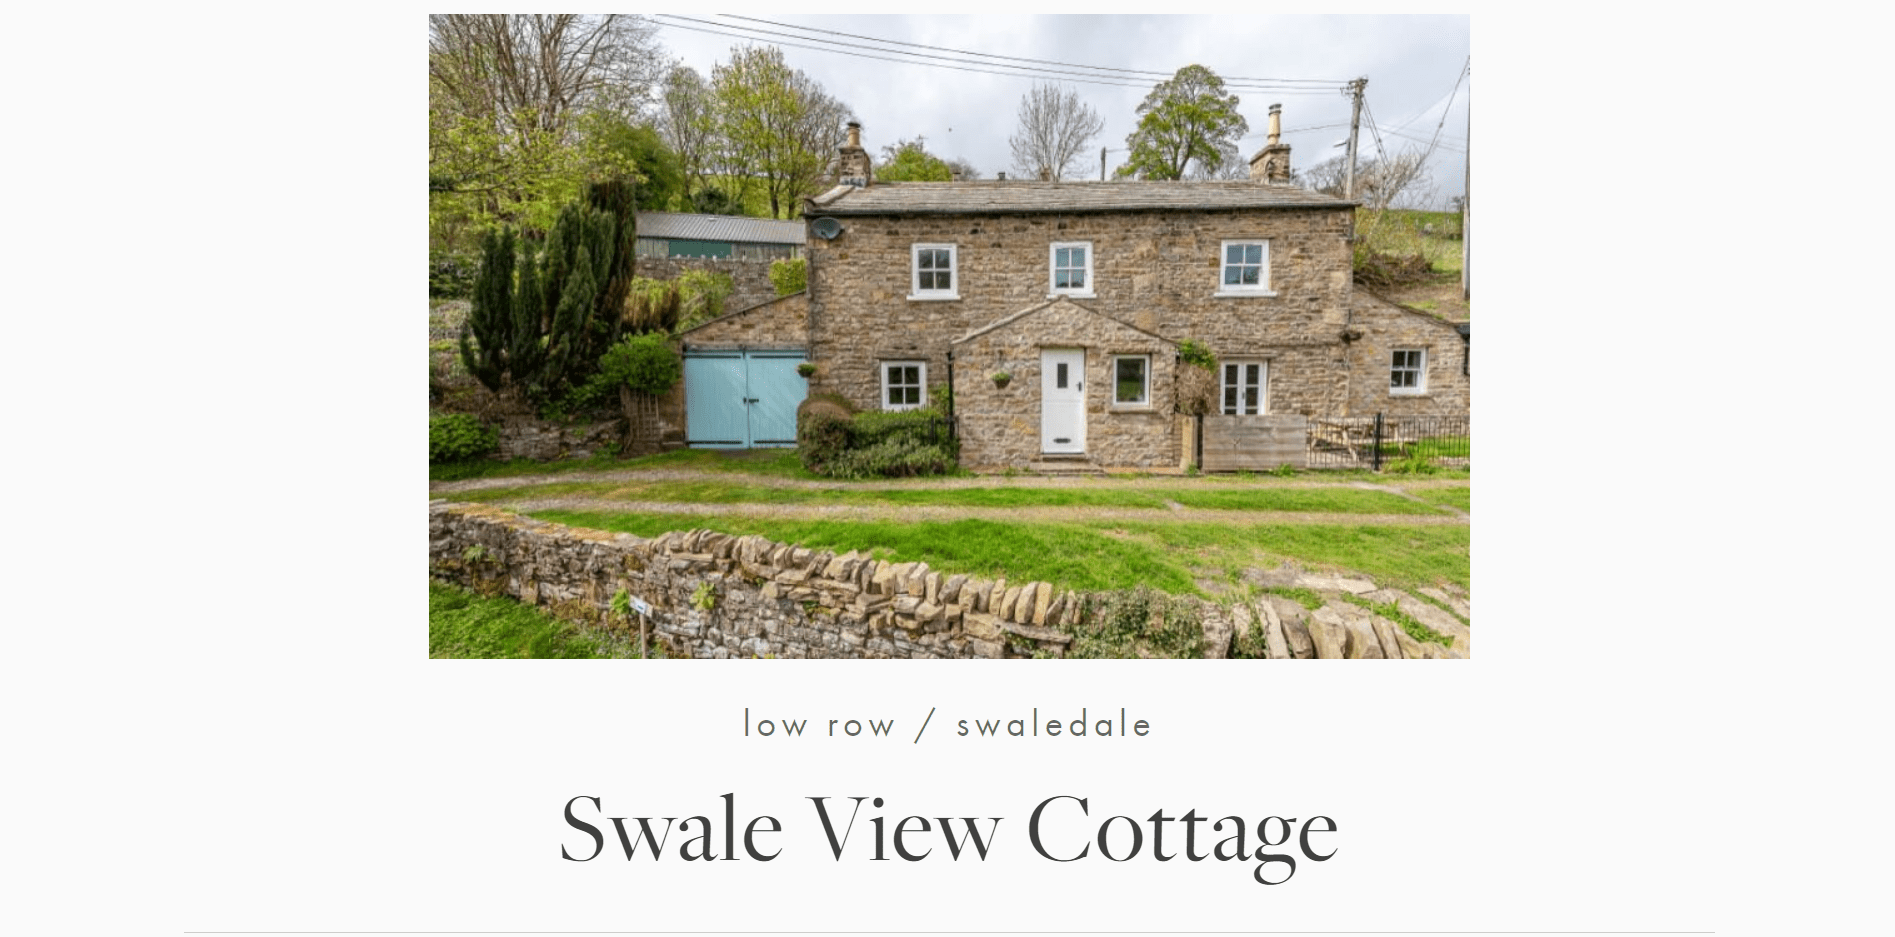 Swale View Cottage